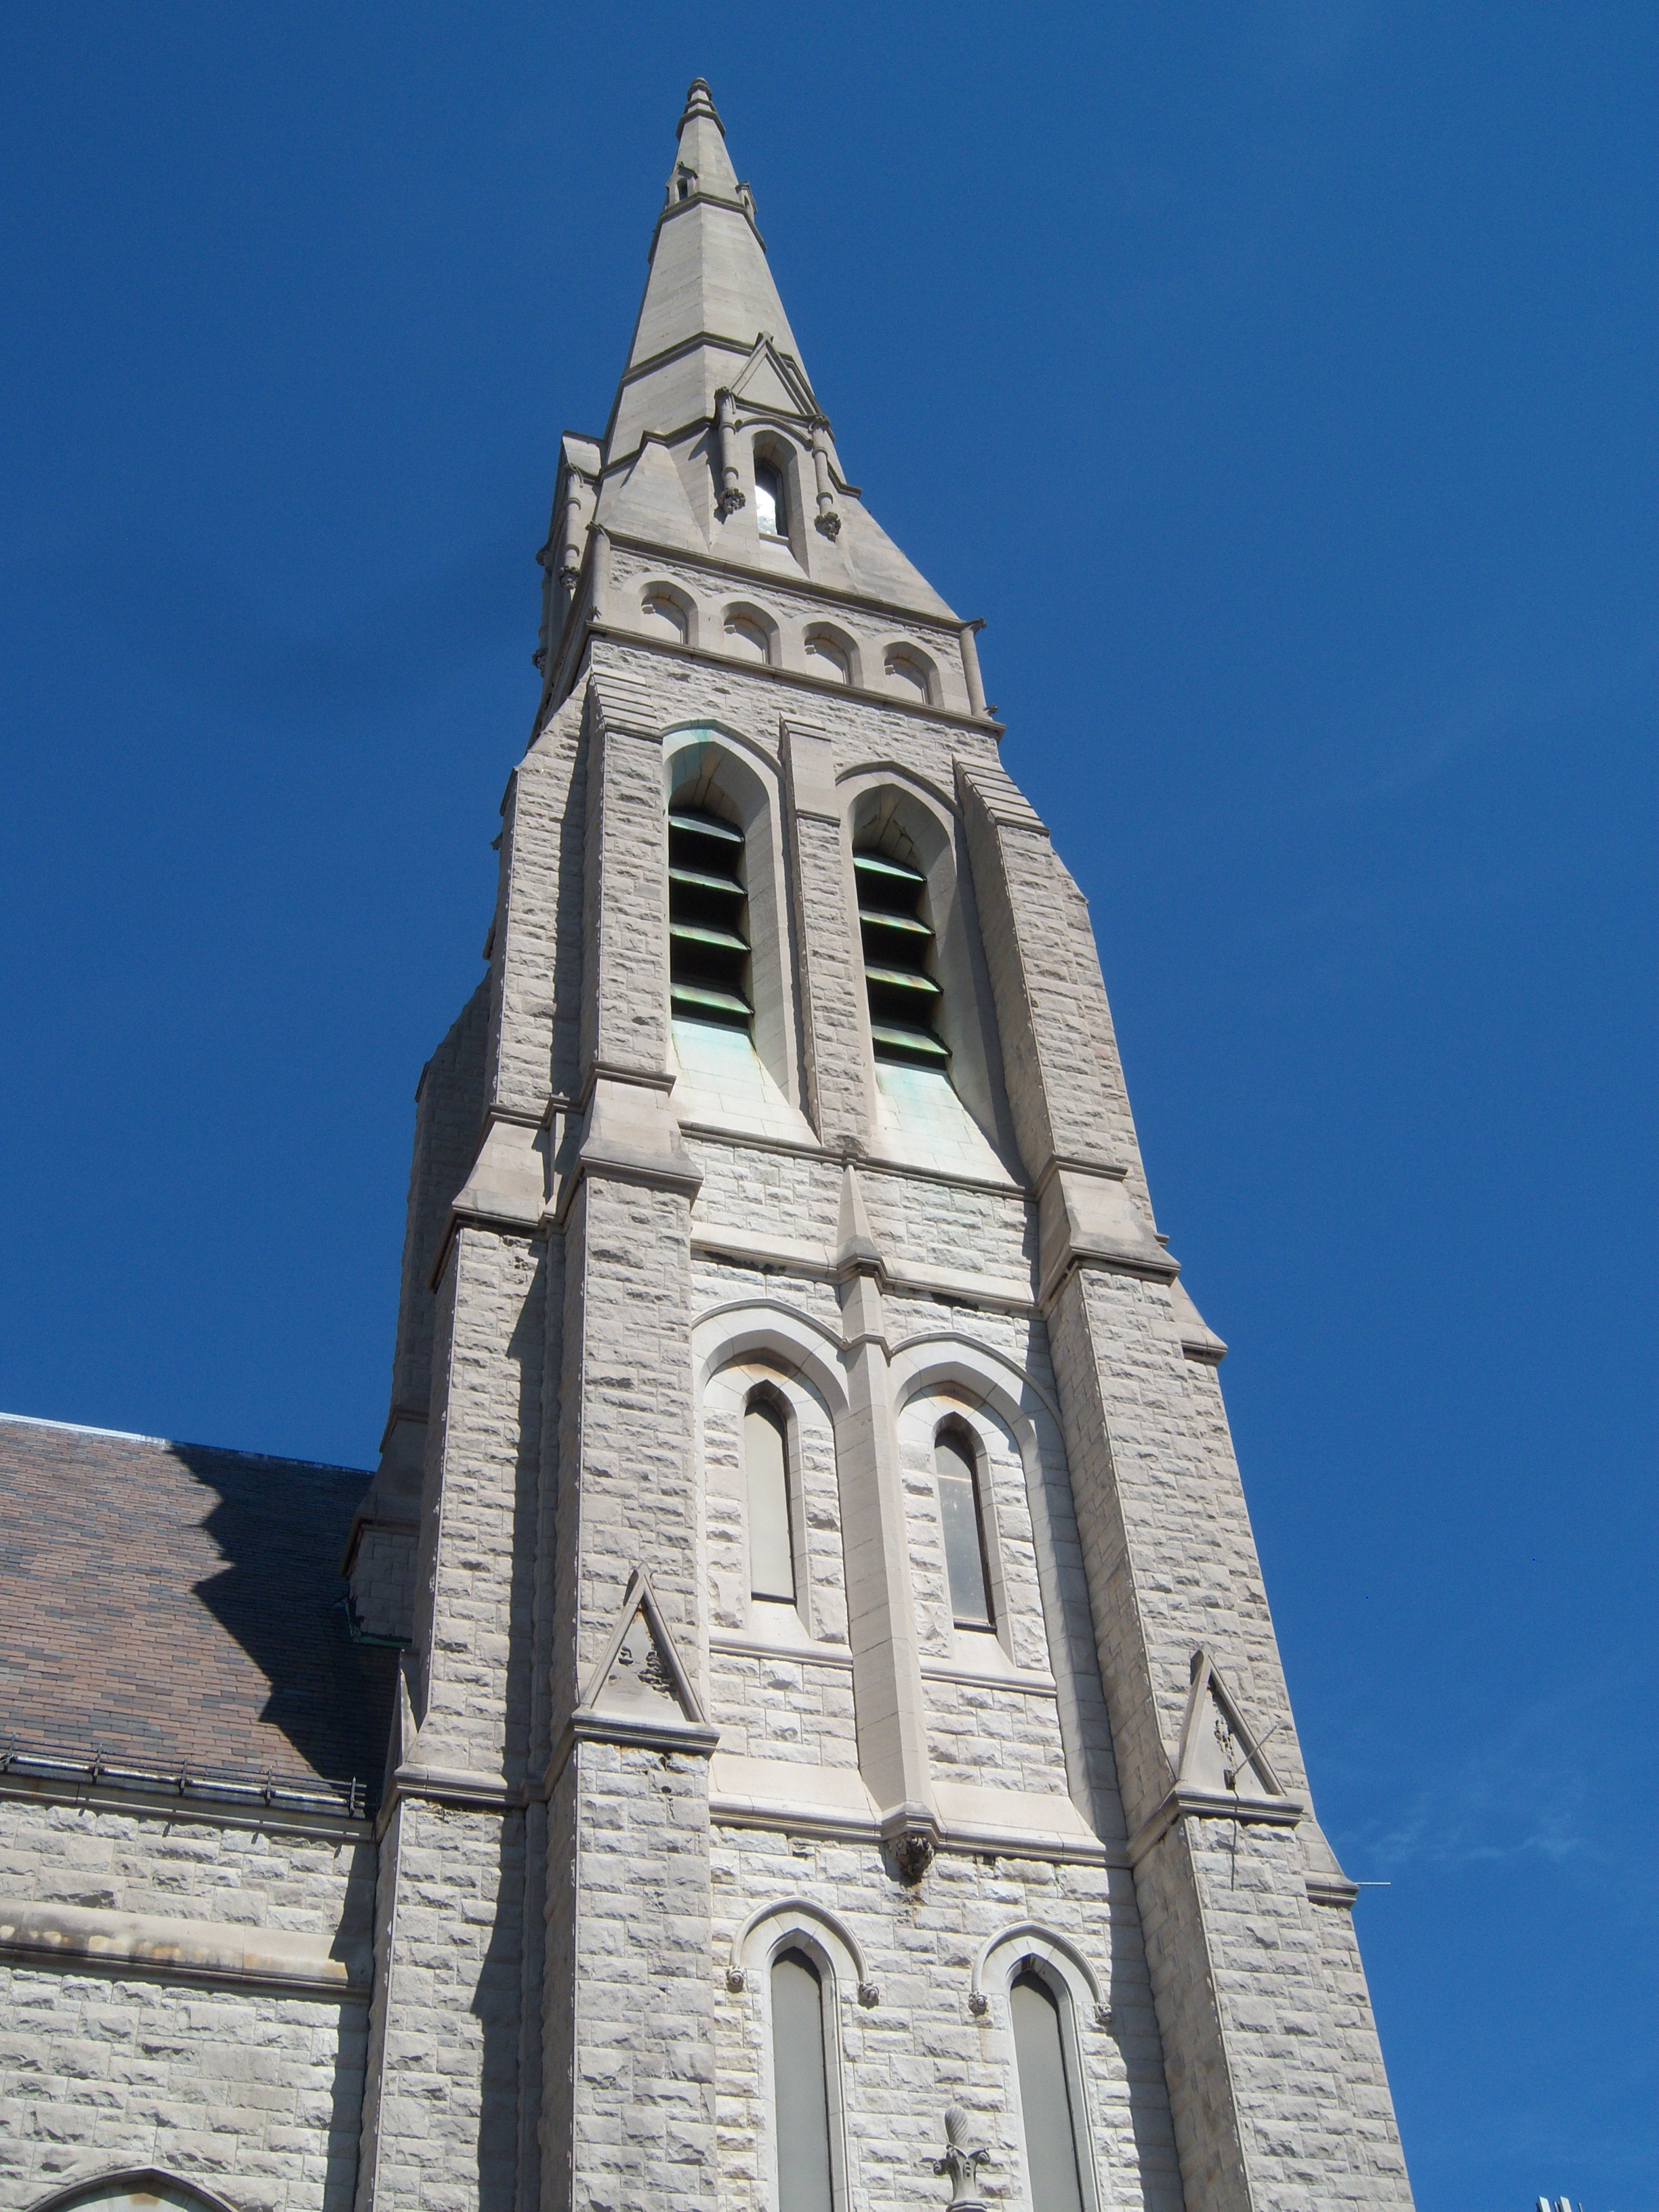 File:Old First Reformed Church steeple.jpg - Wikimedia Commons